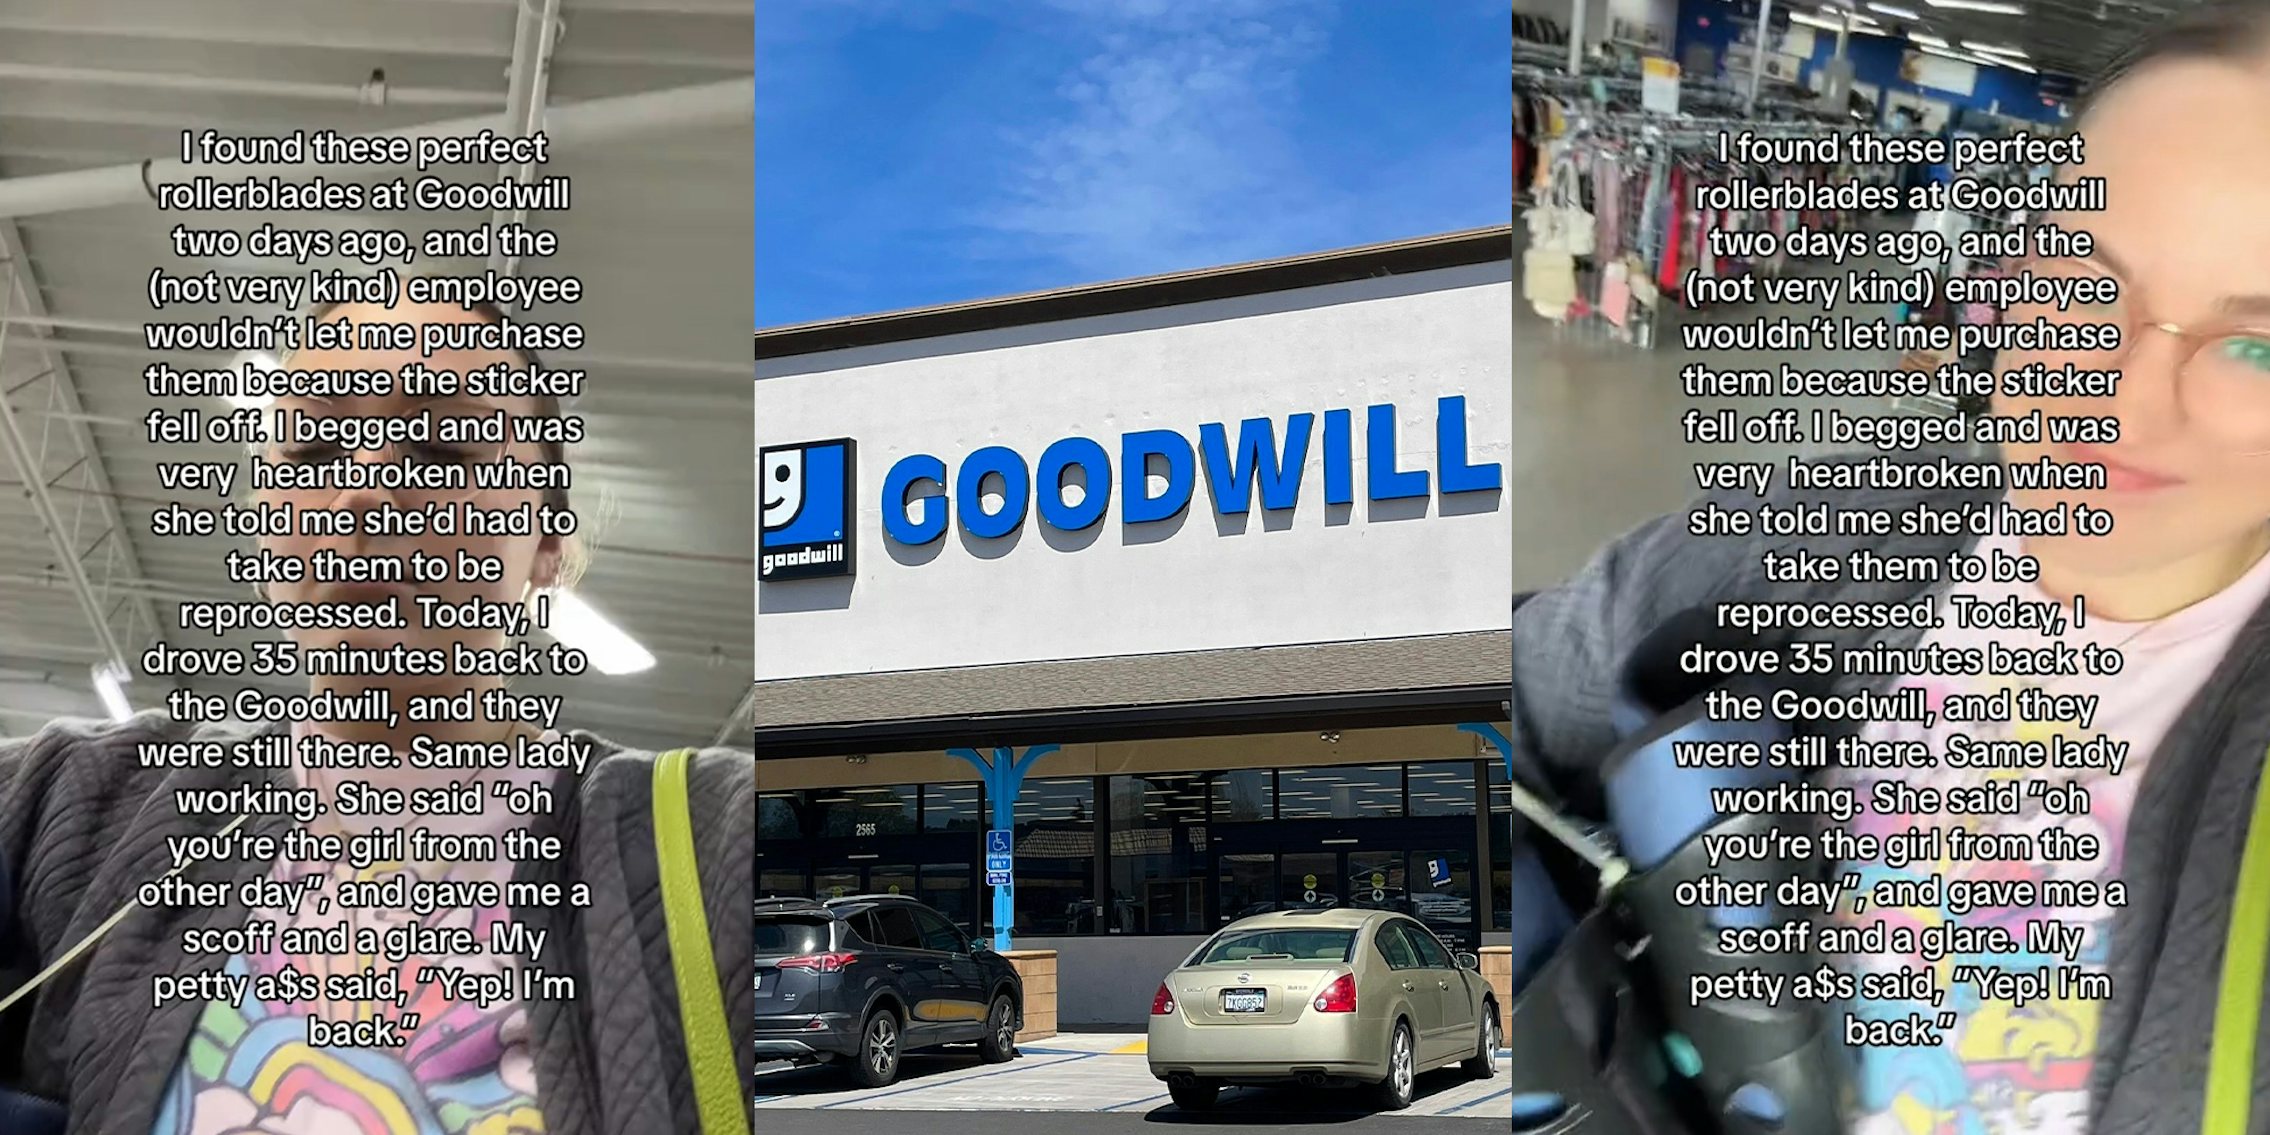 Goodwill customer says worker blocked her from buying ‘perfect rollerblades’ after sticker fell off; Goodwill store front